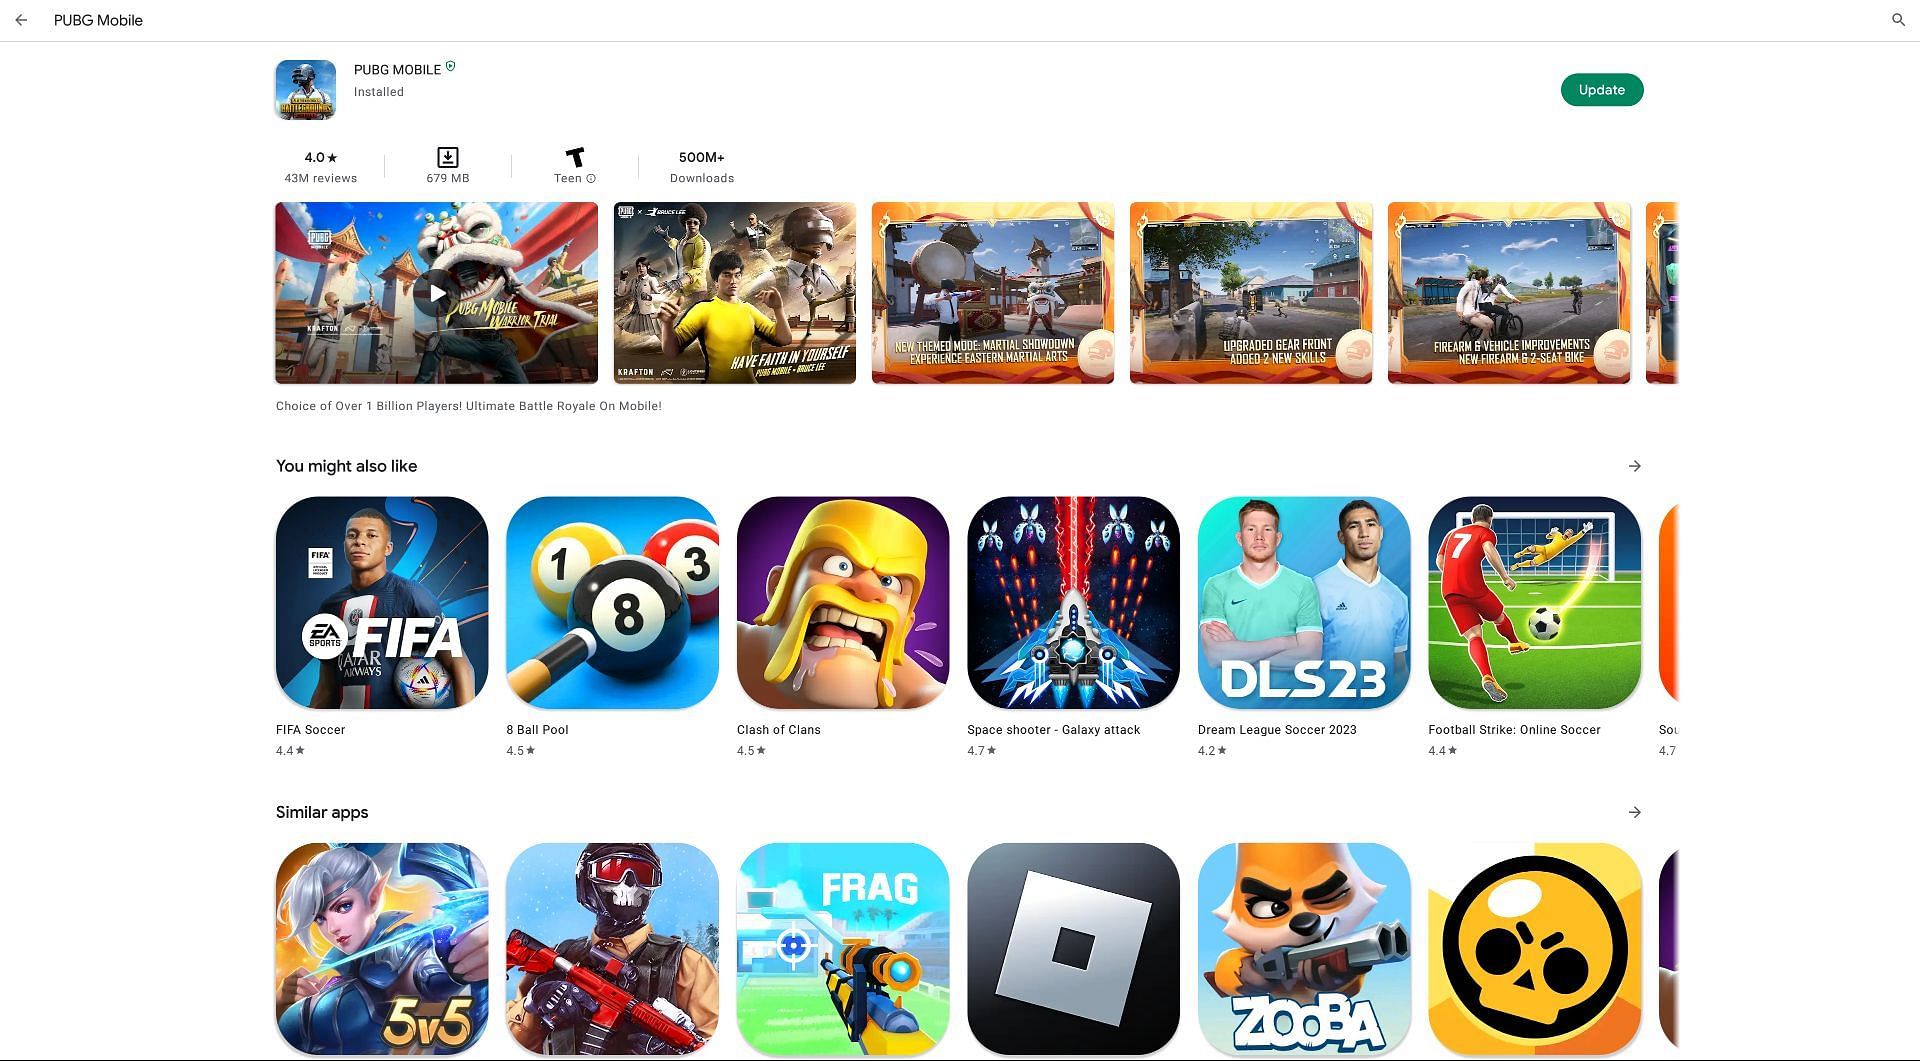 Search for the game and click update (Image via Google Play Store)